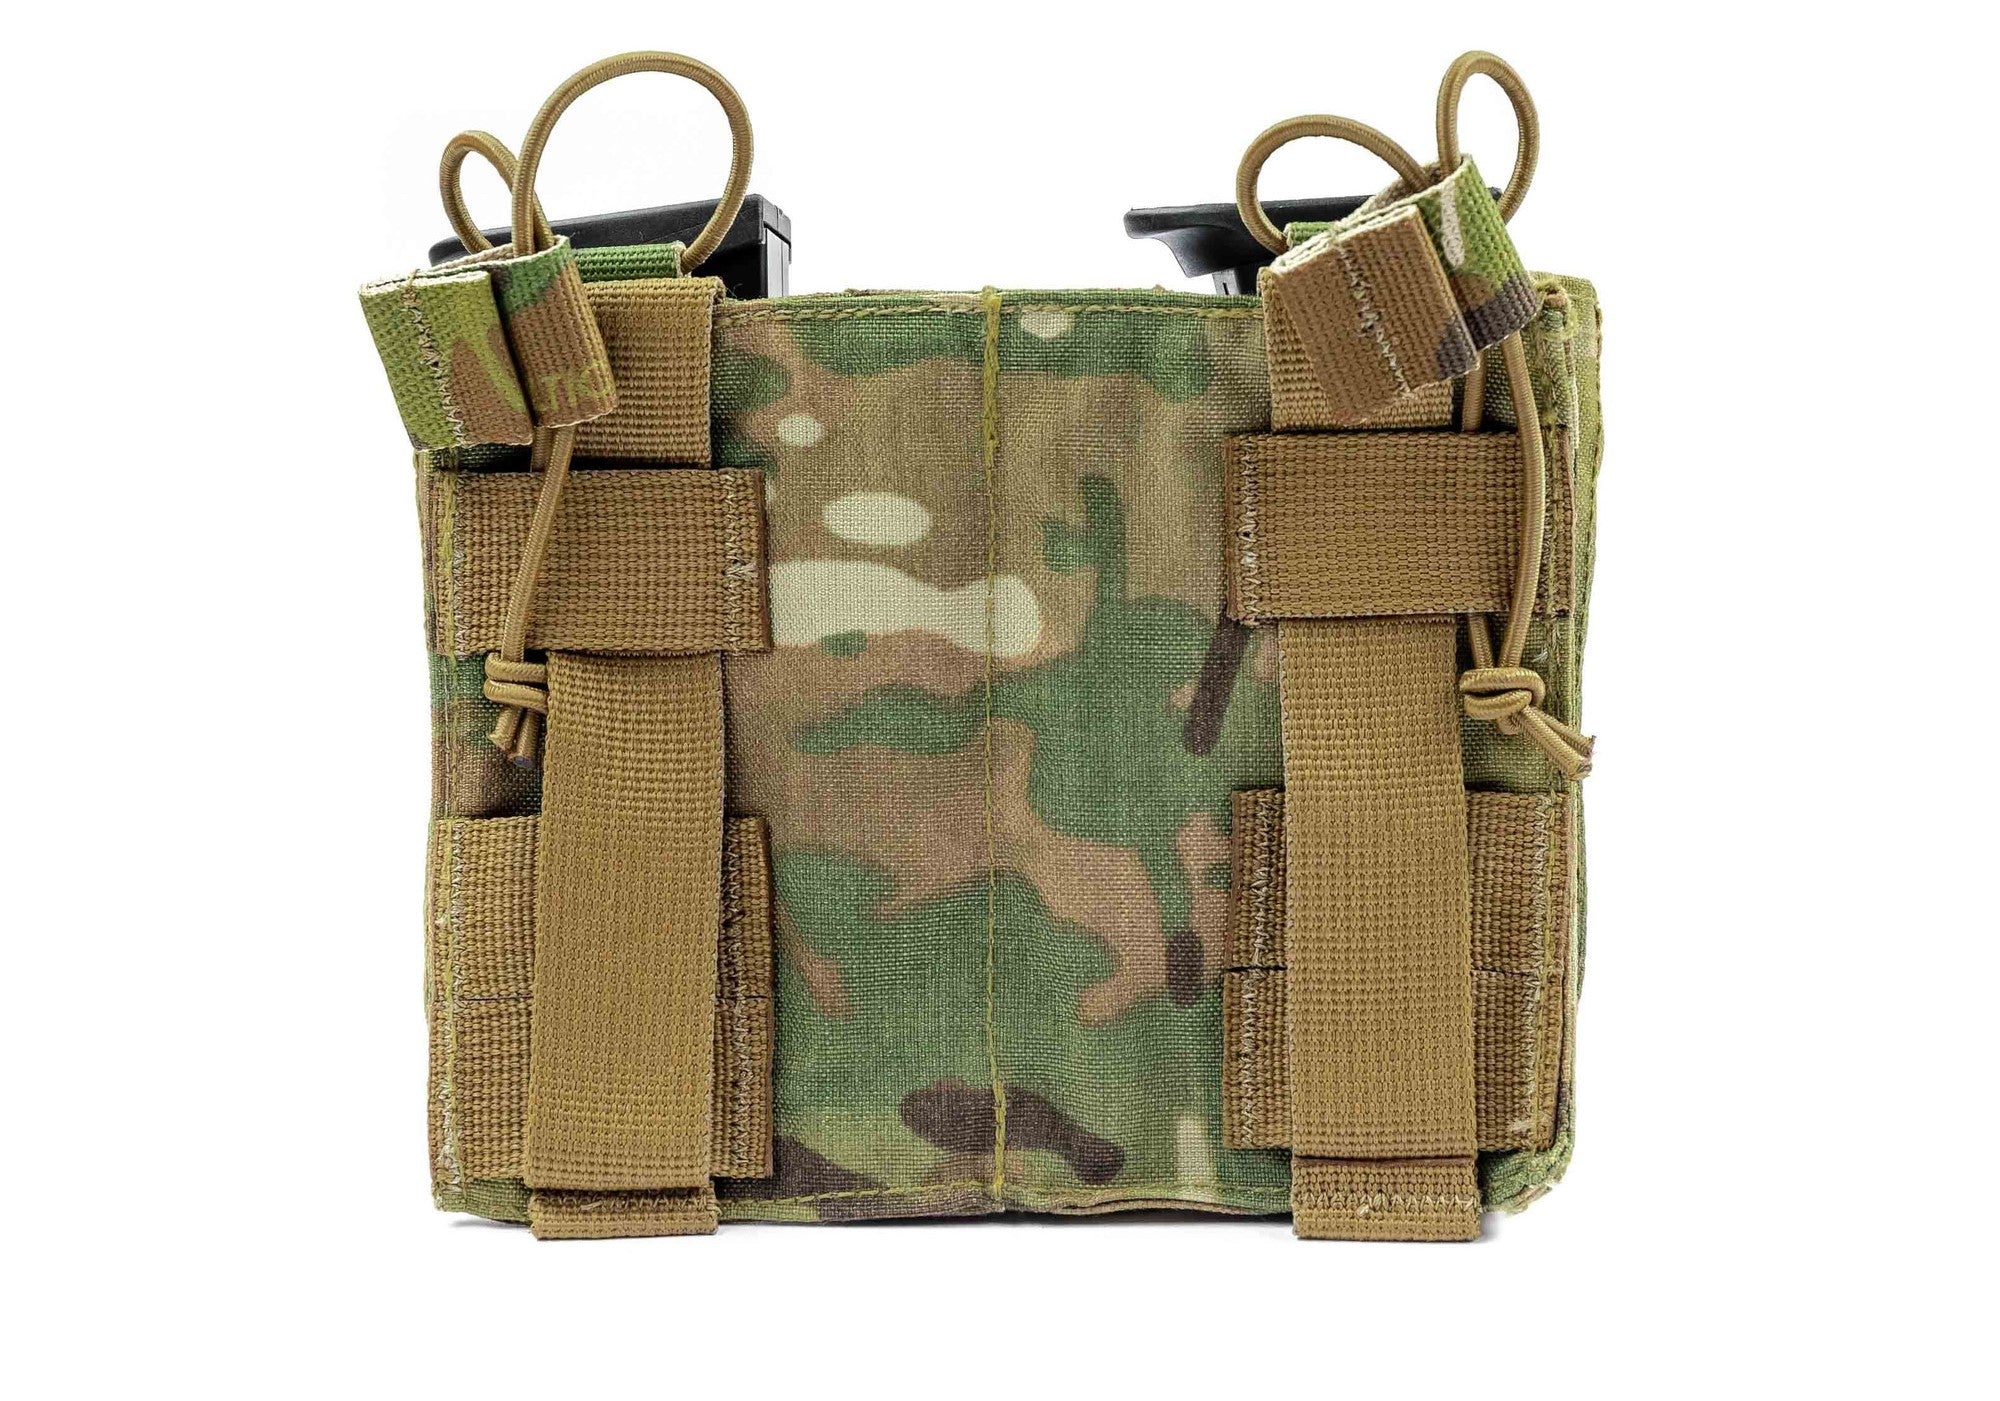 T3 Gear Magnet M4 Single Row Mag Pouch